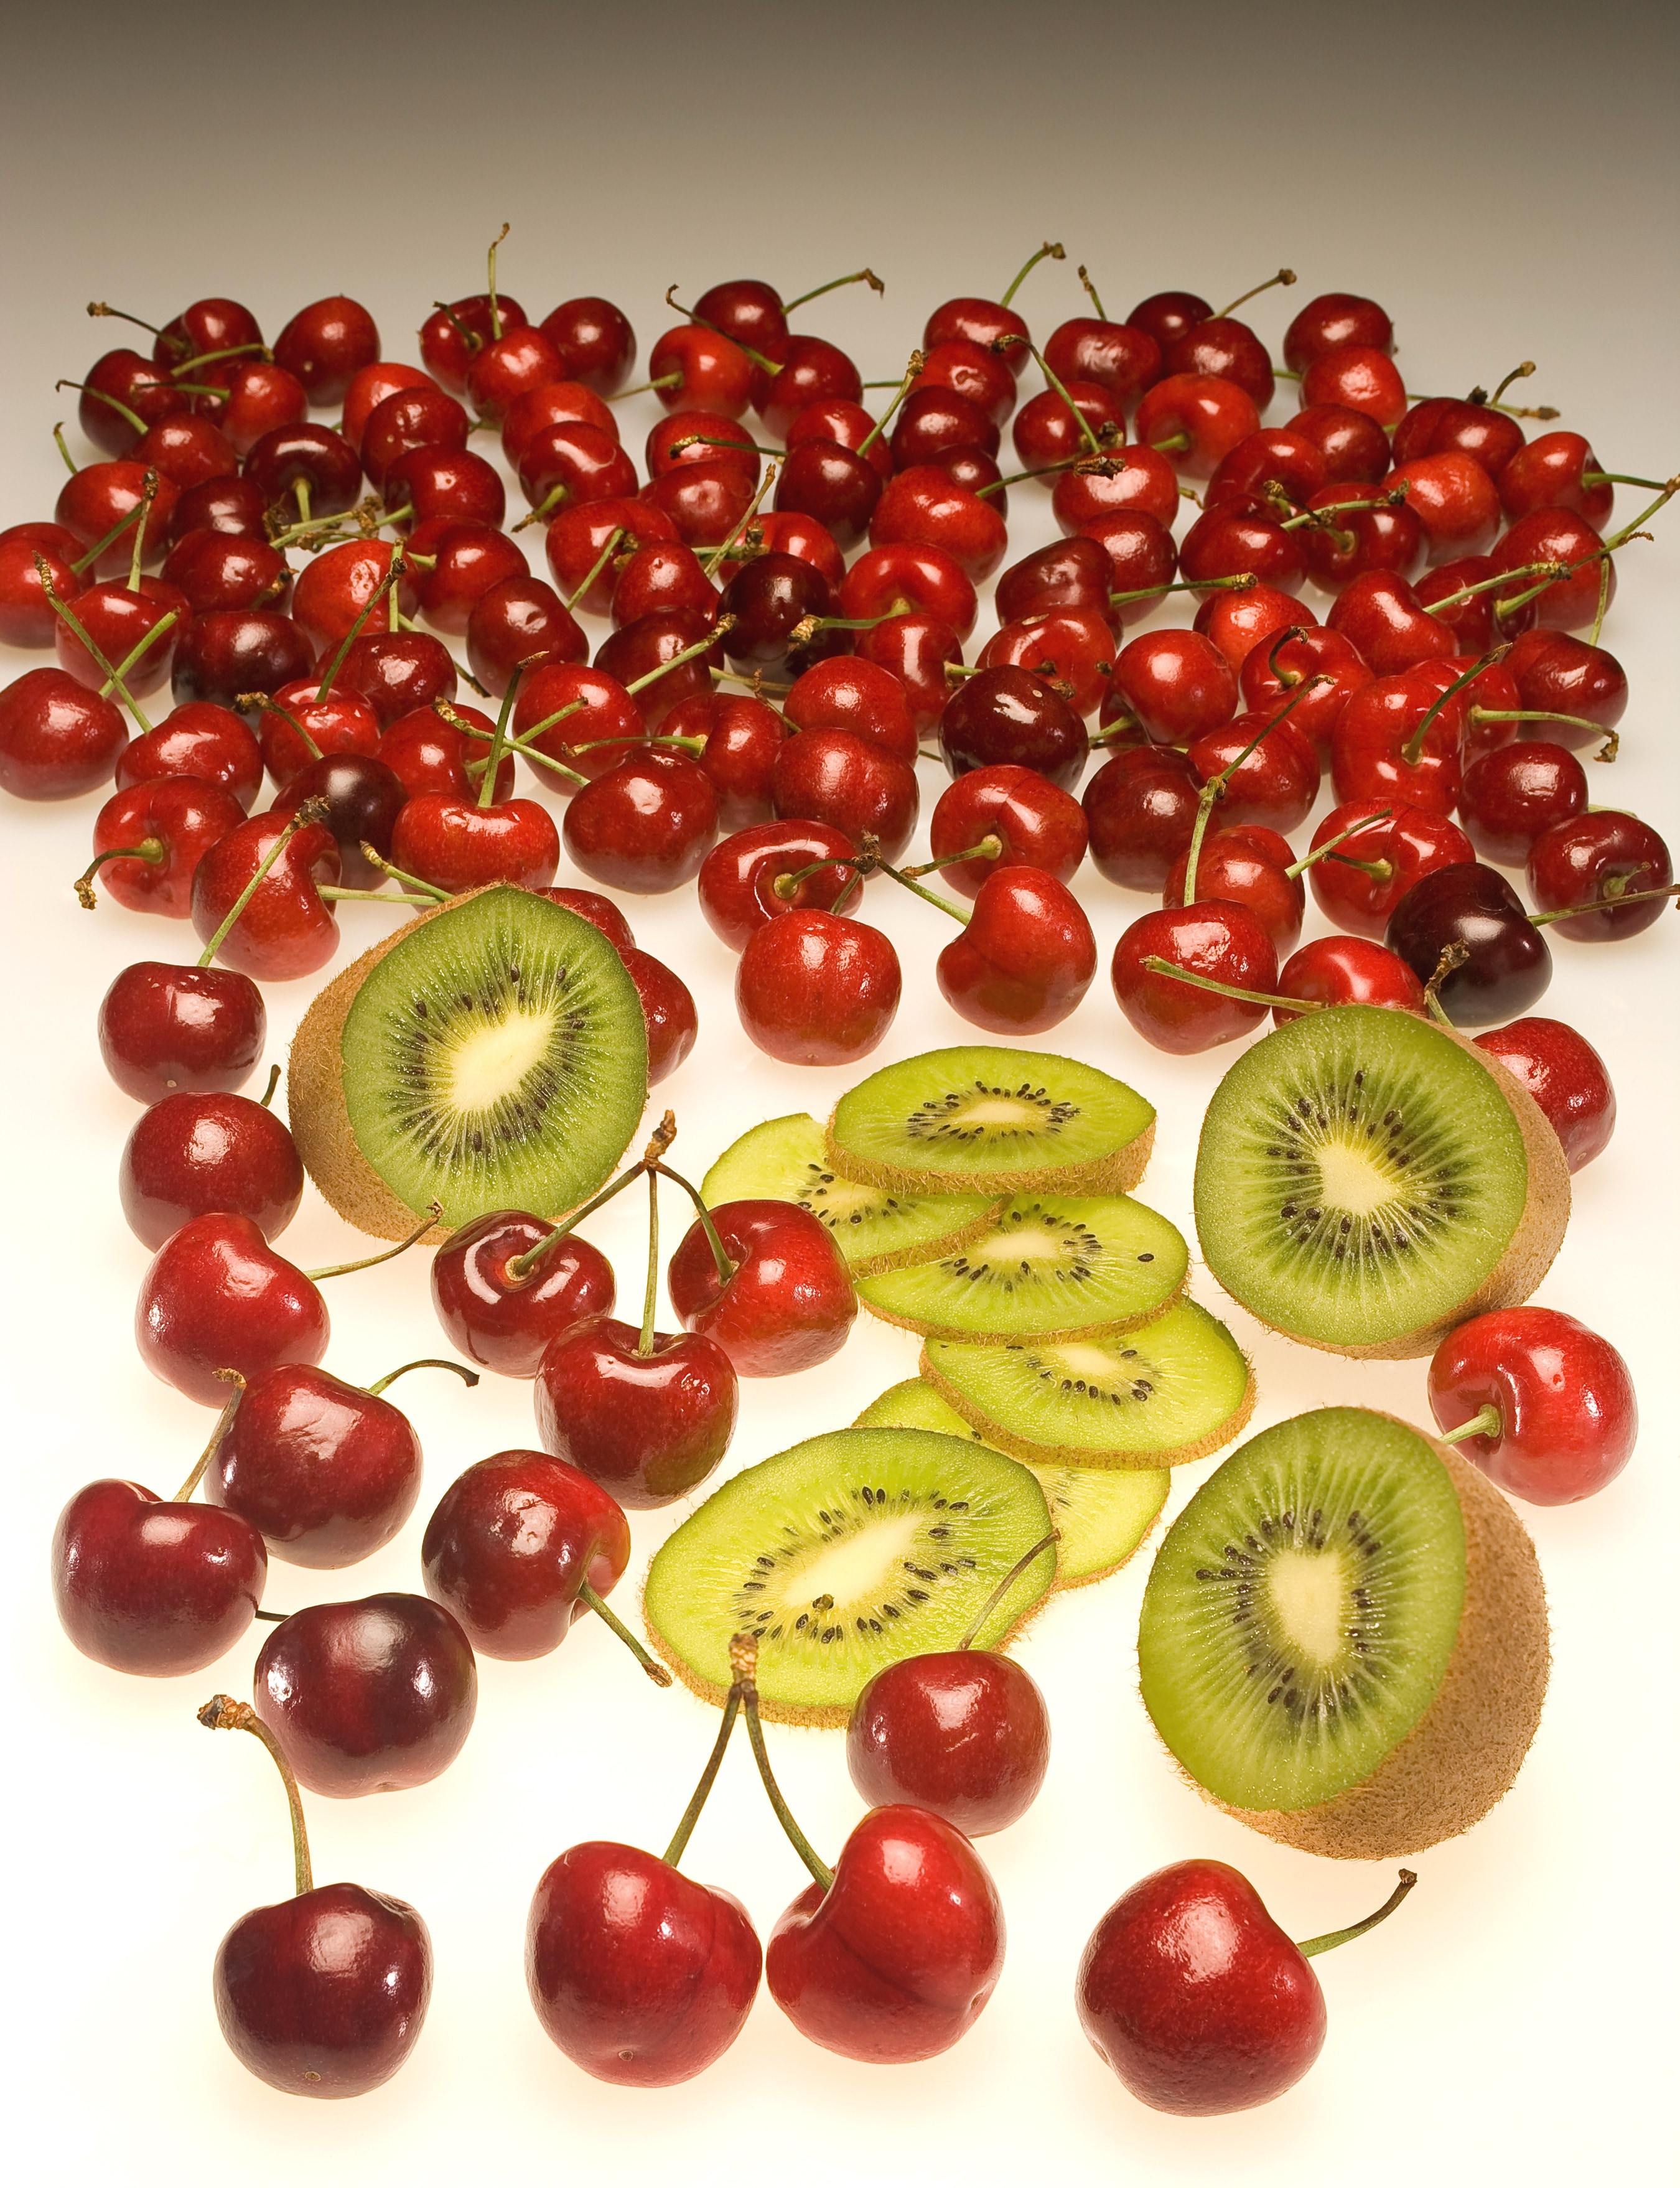 sliced kiwi fruits and red cherries